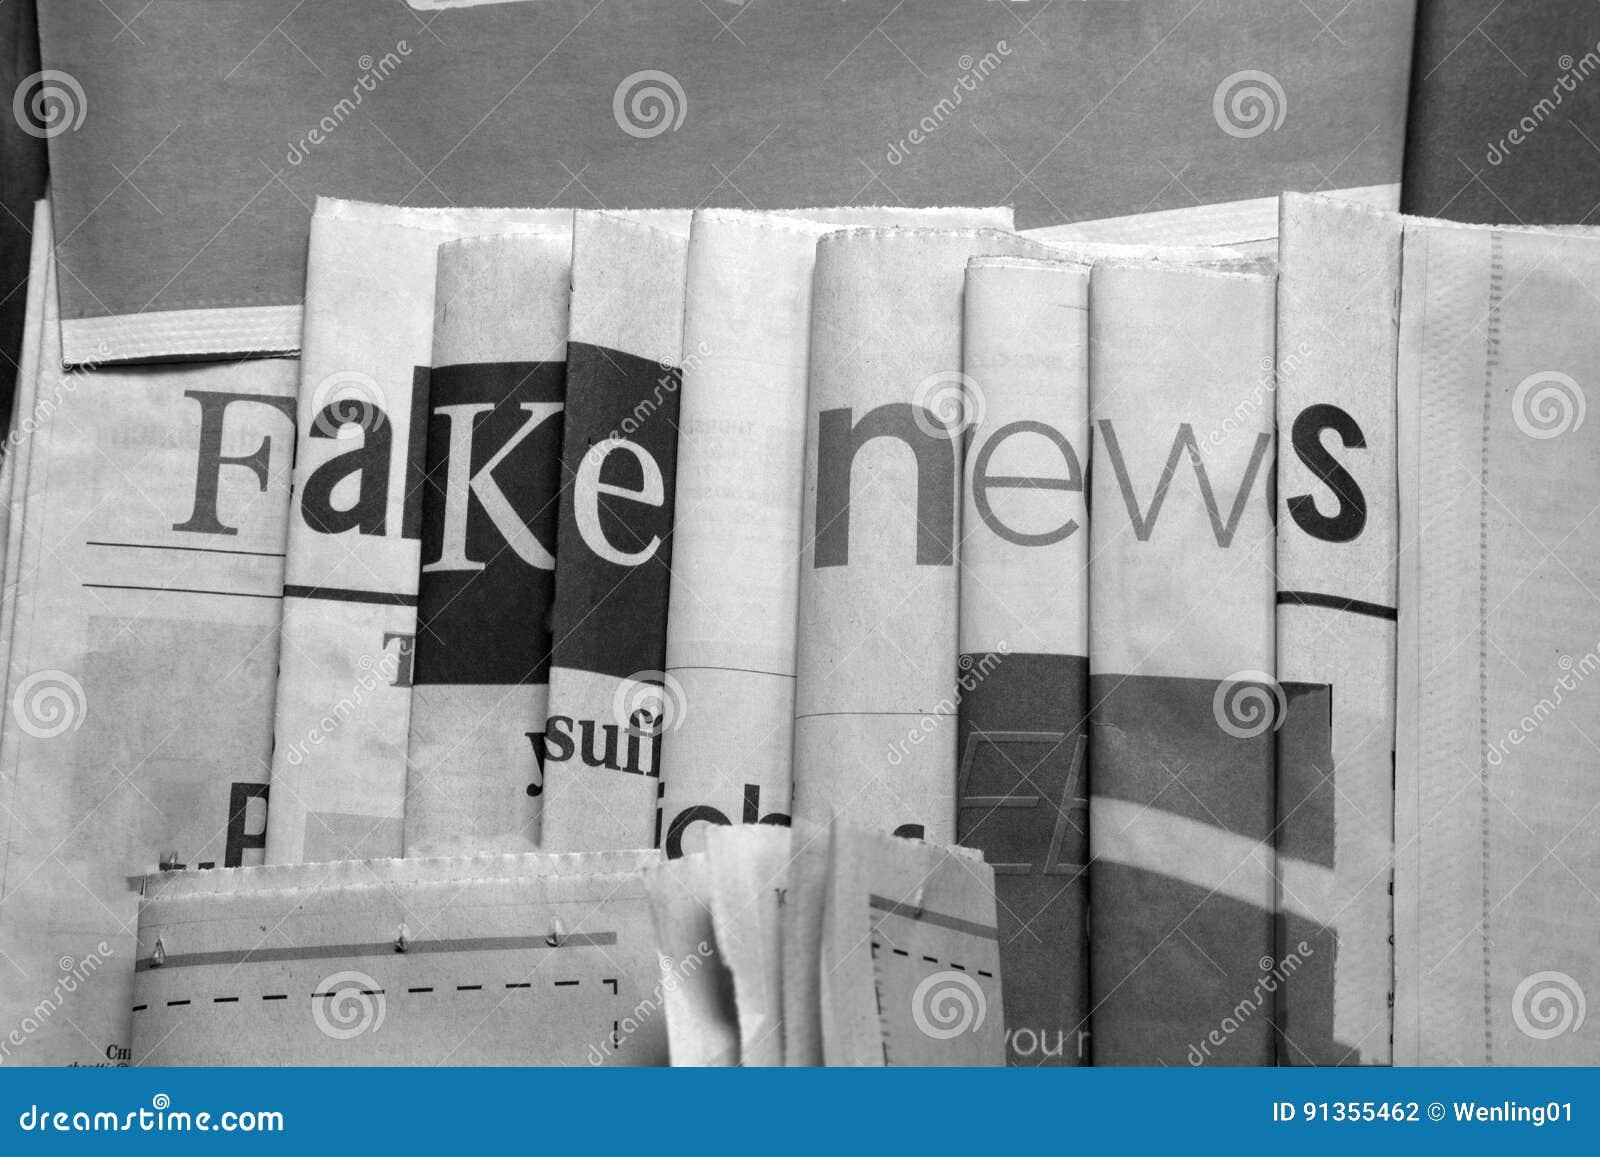 fake news on newspapers black and white background